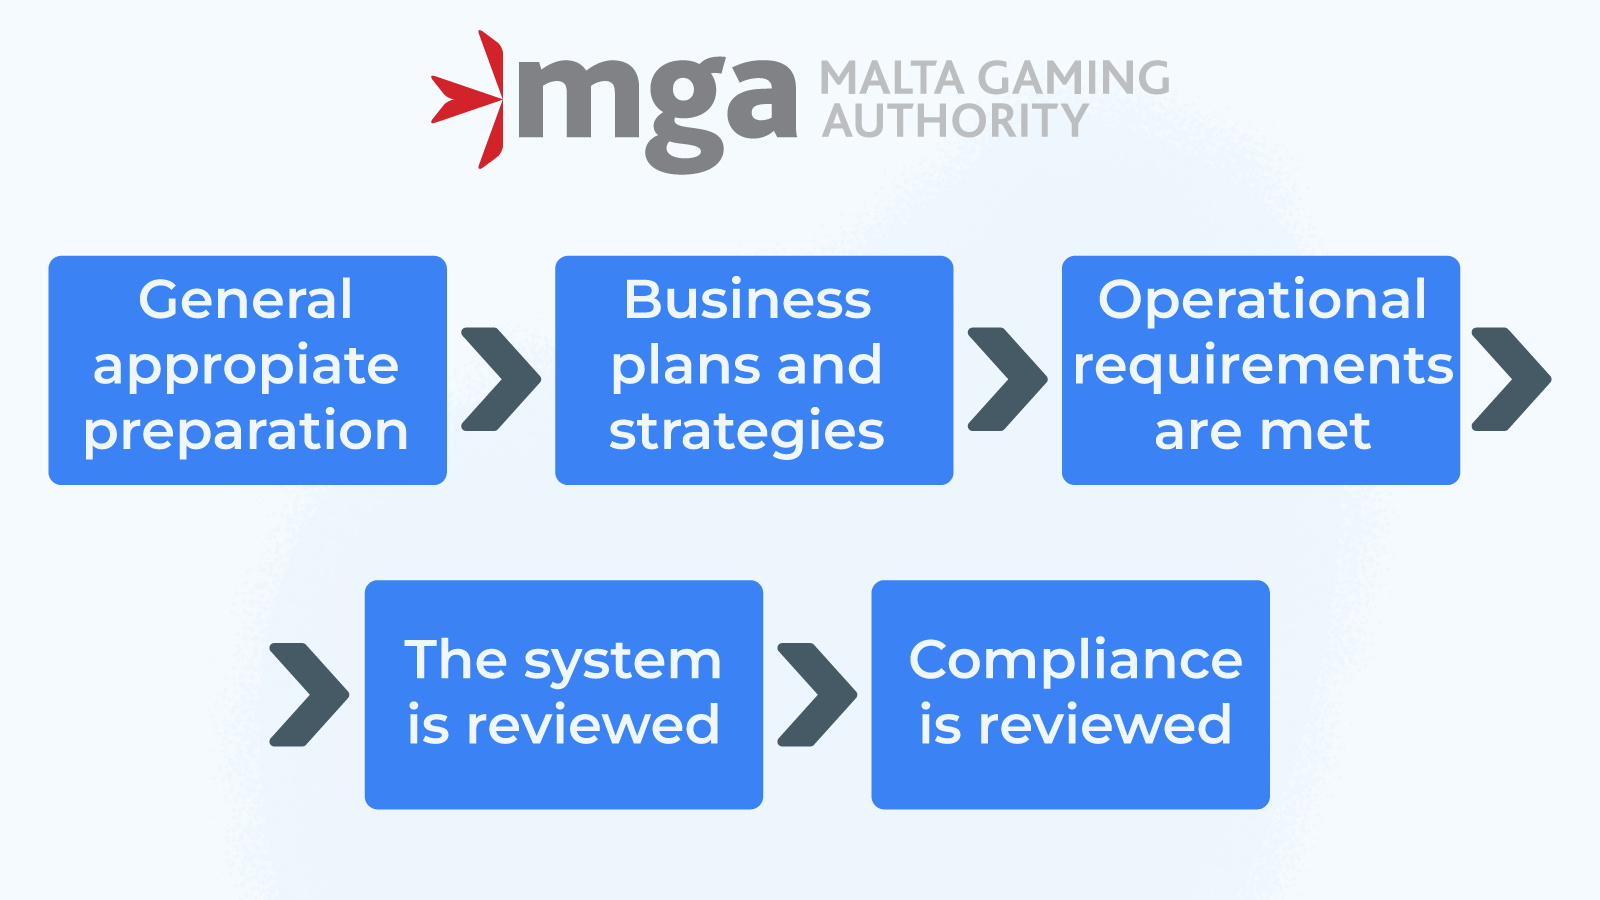 The case of the Malta Gaming Authority